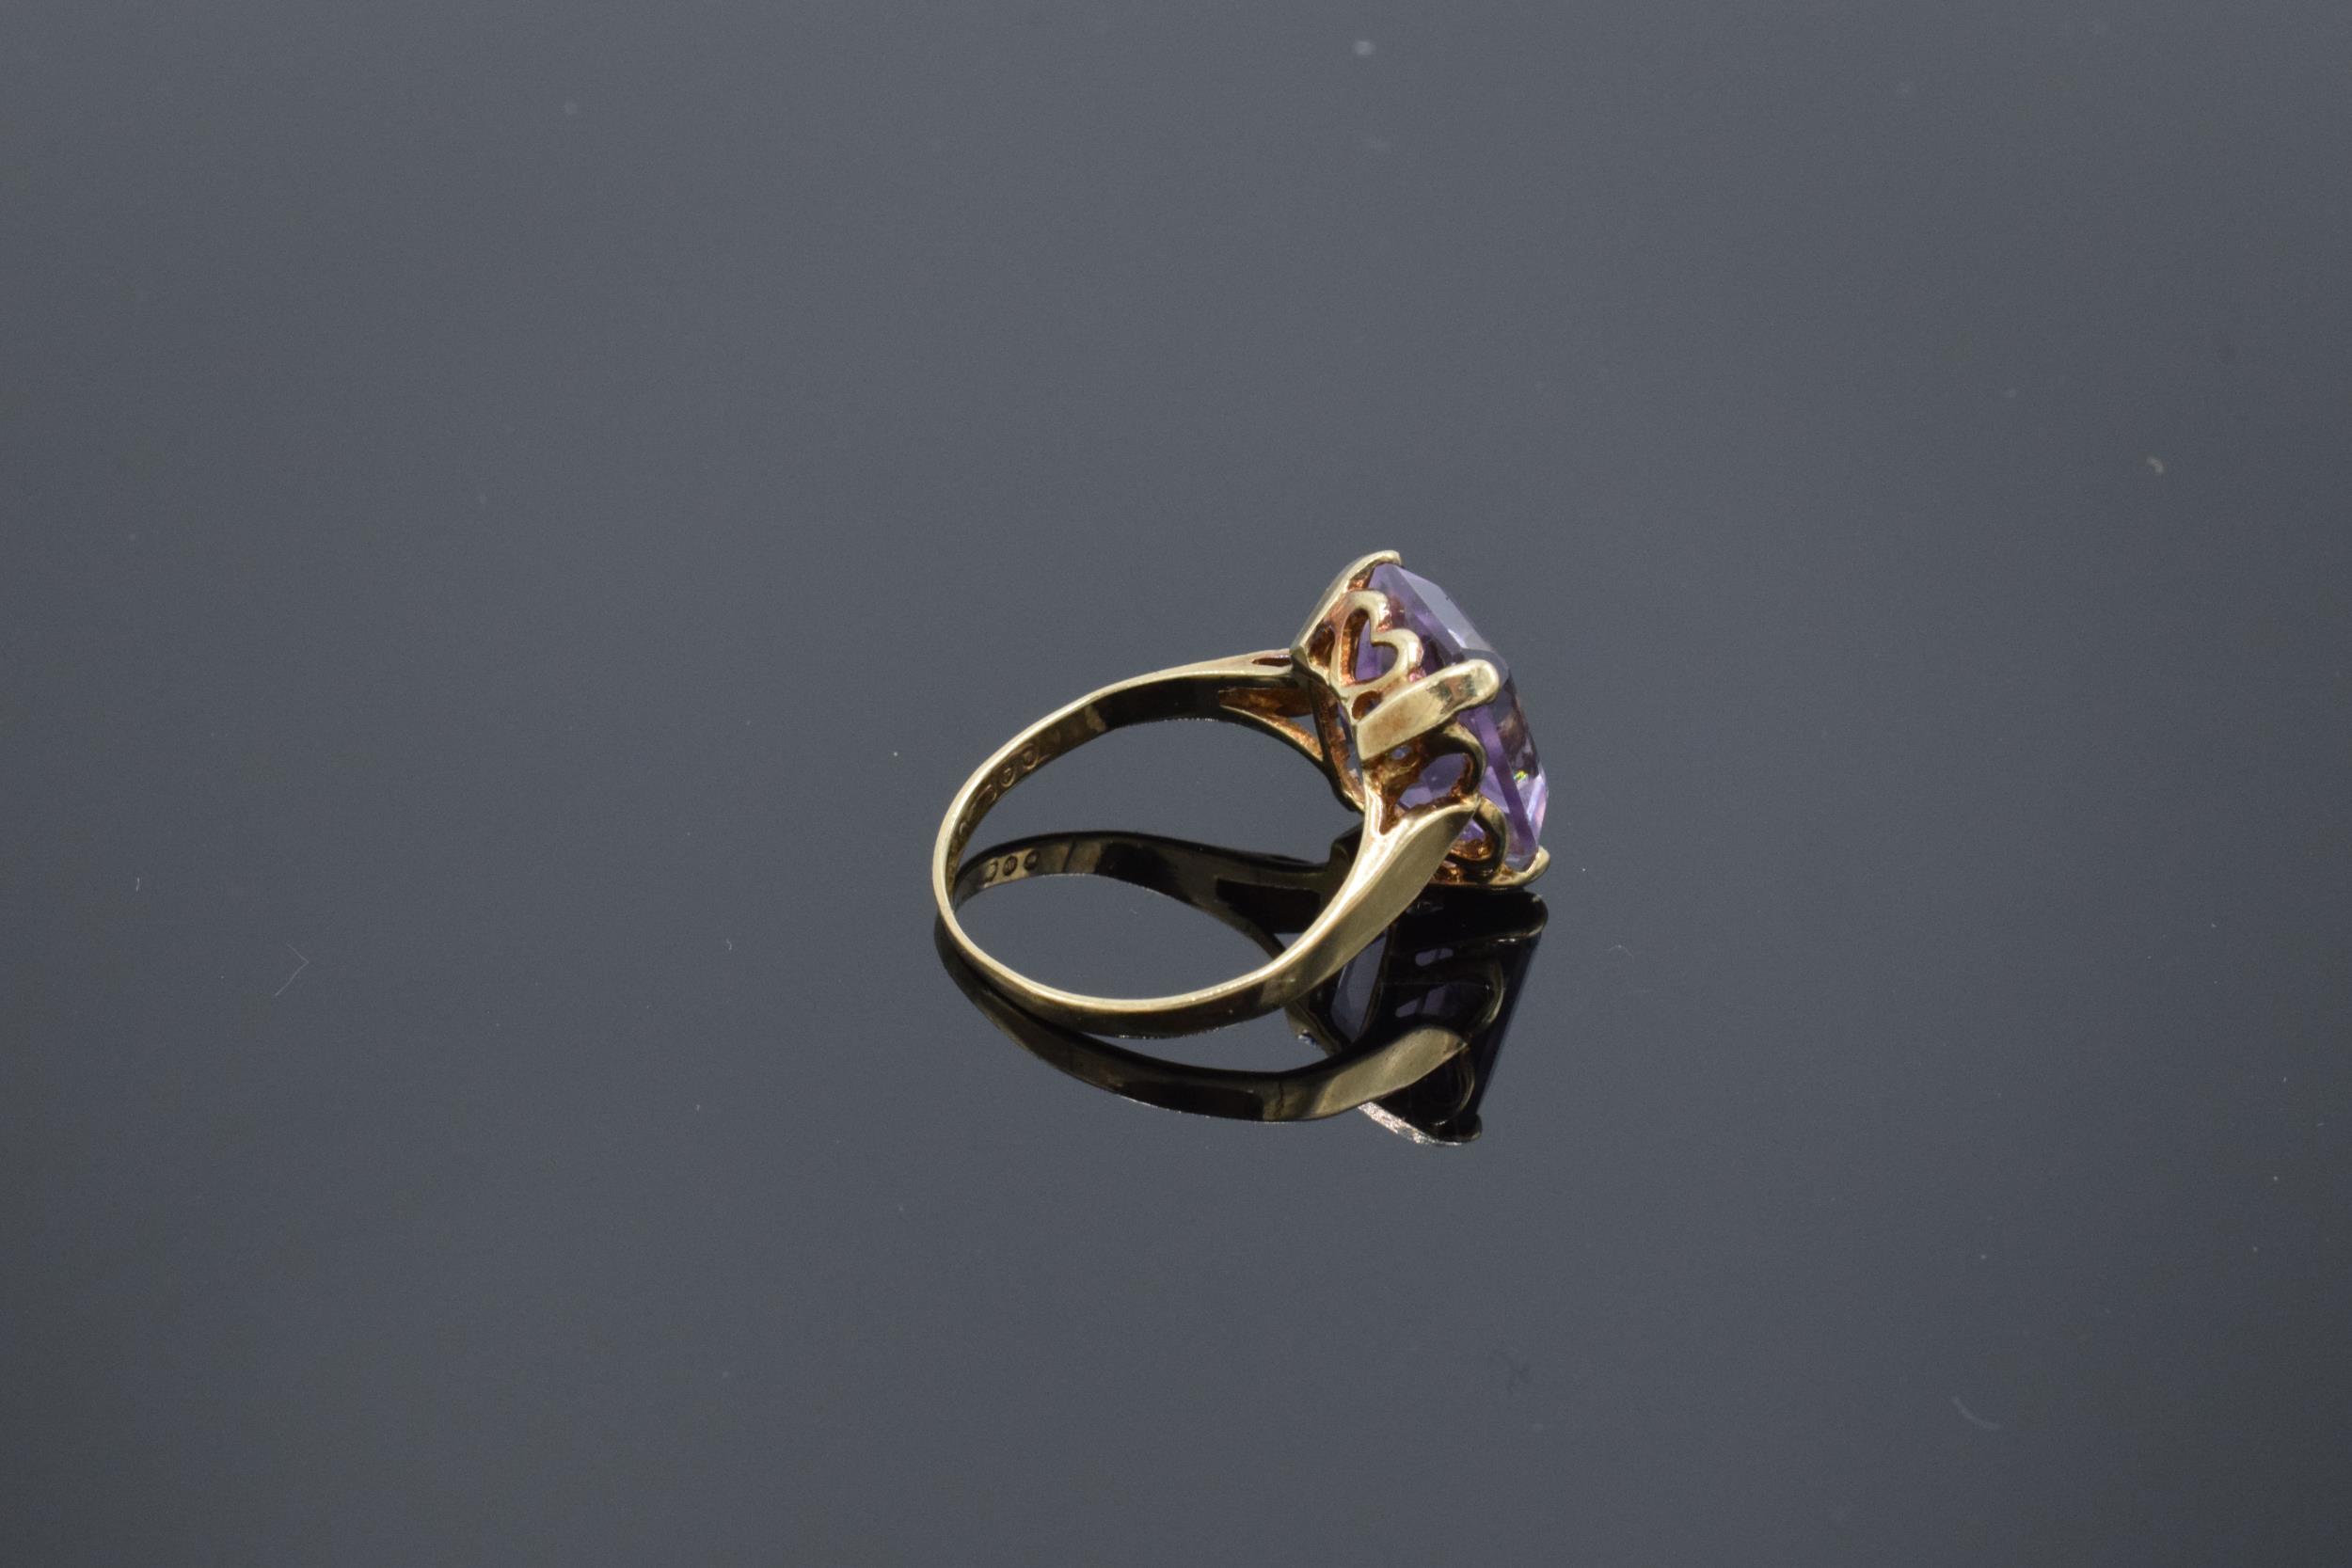 9ct gold ladies ring set with a large amethyst stone. 3.1 grams. UK size O/P. Hallmarks slightly - Image 3 of 4